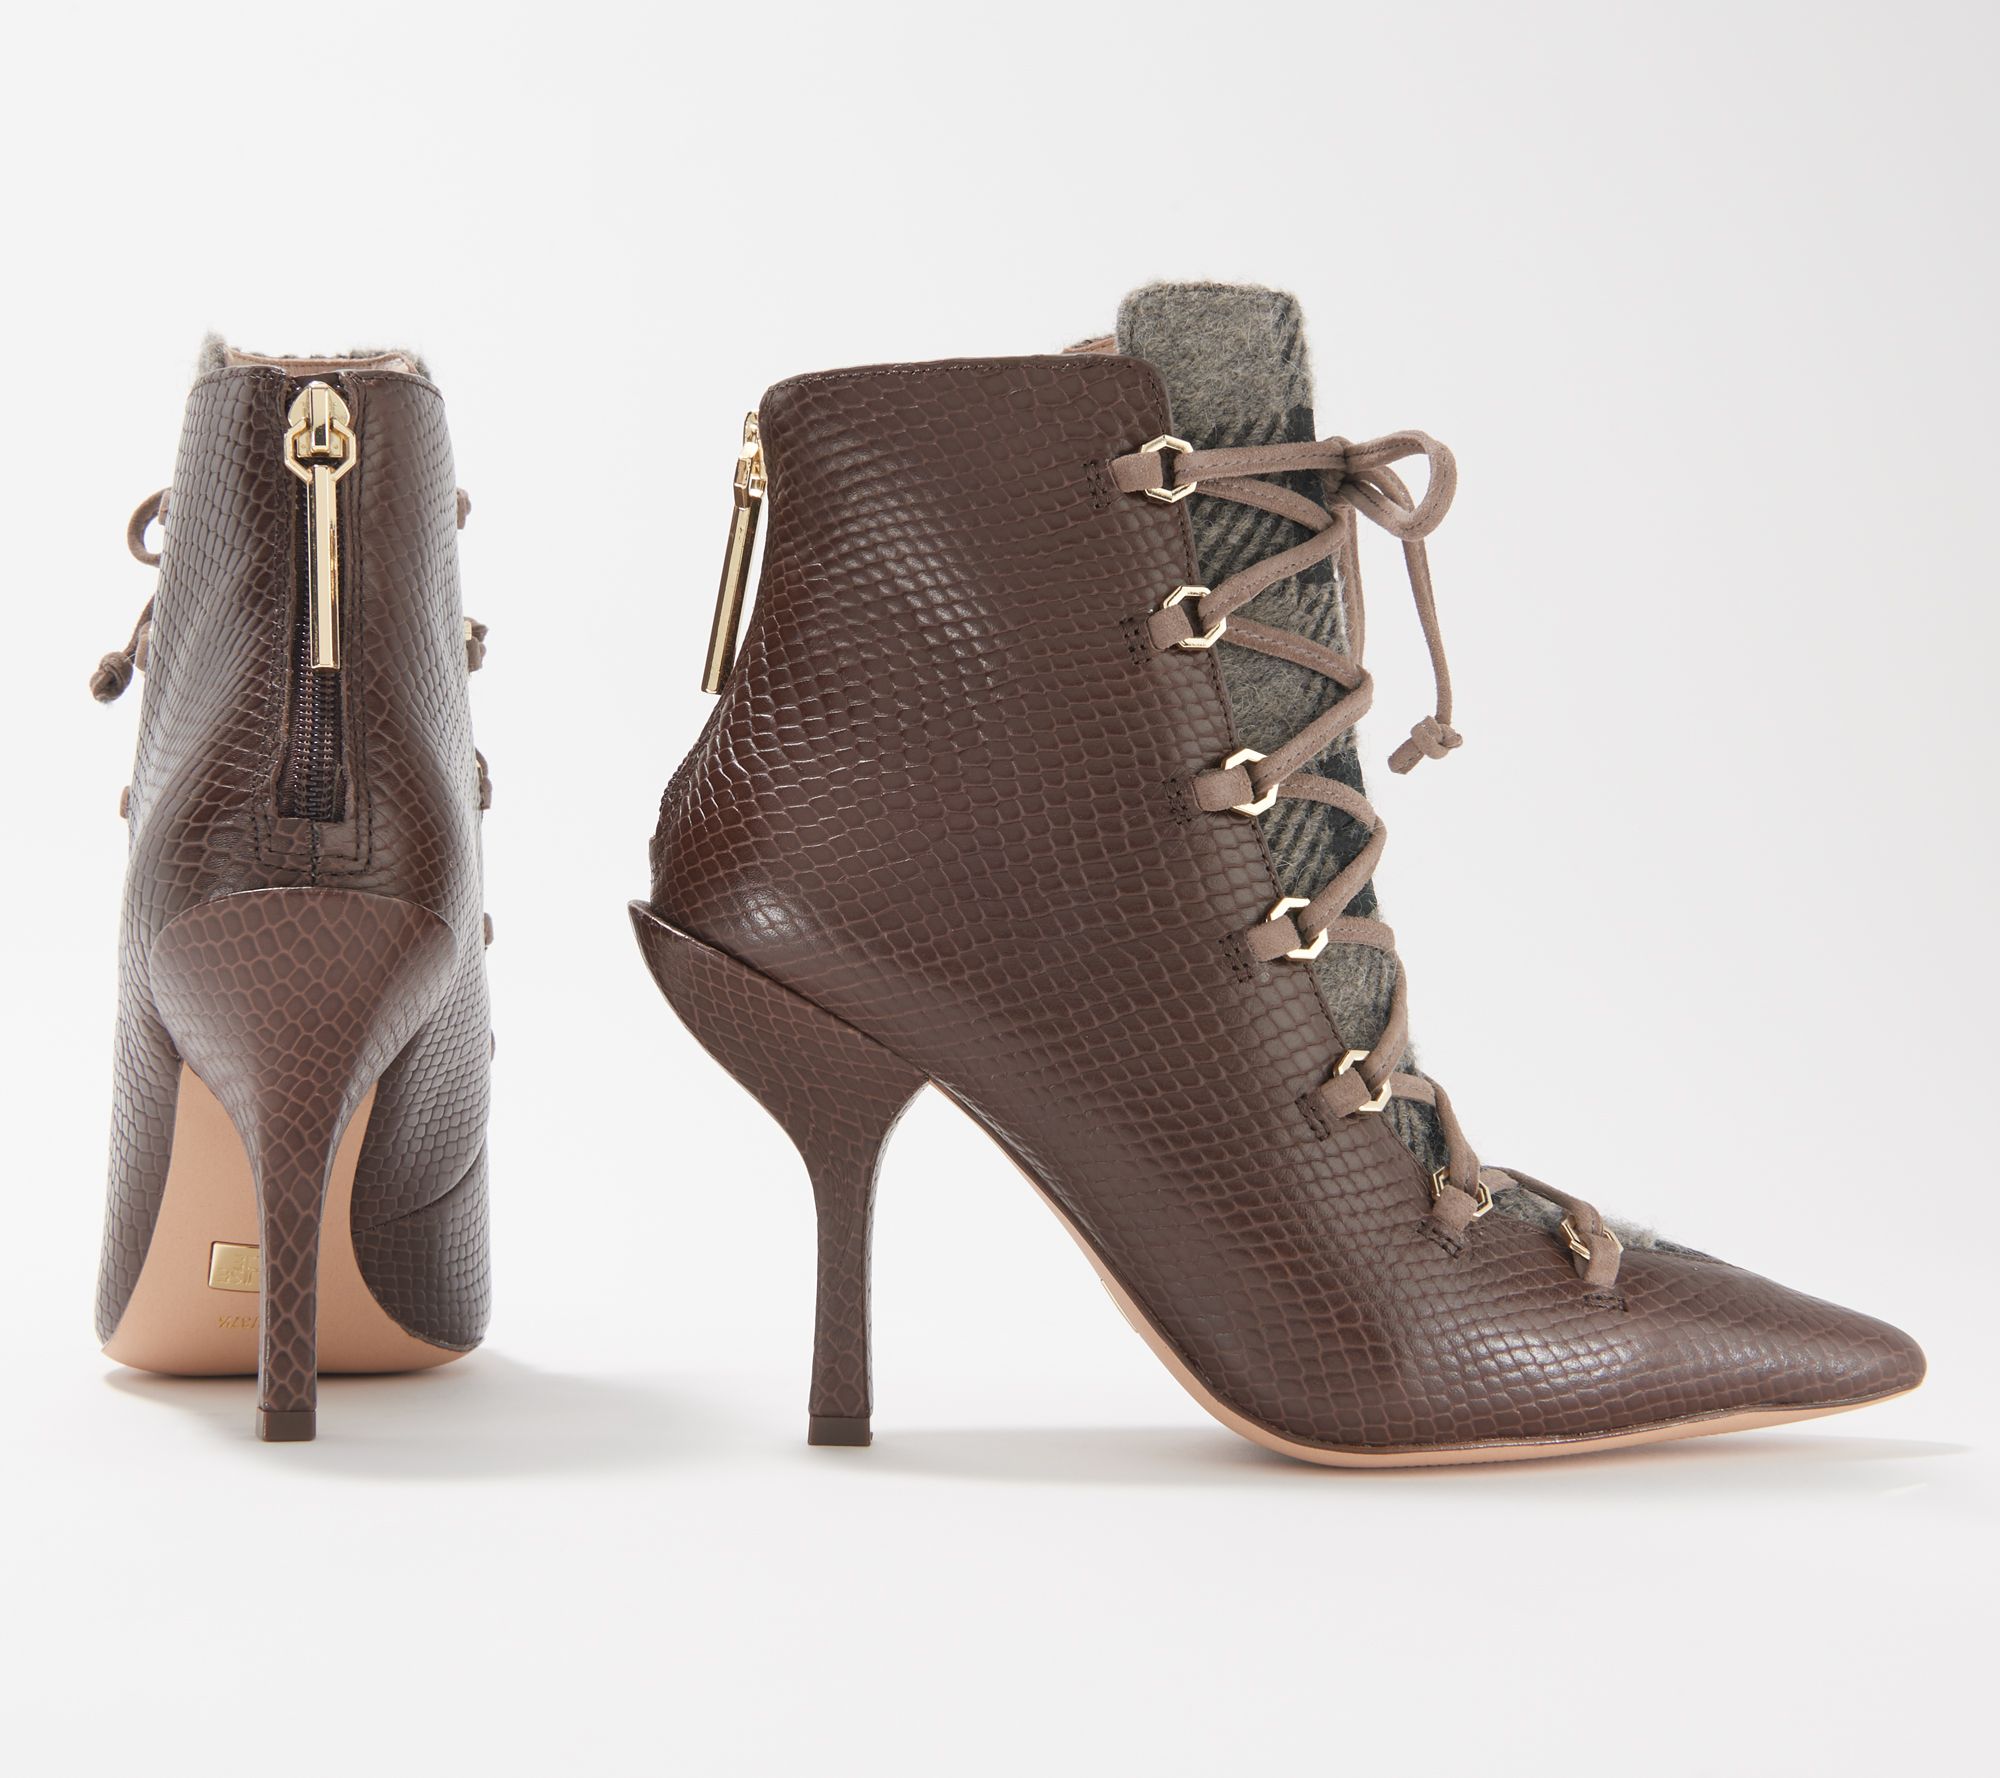 Louise et Cie - The perfect bootie to last you all season long